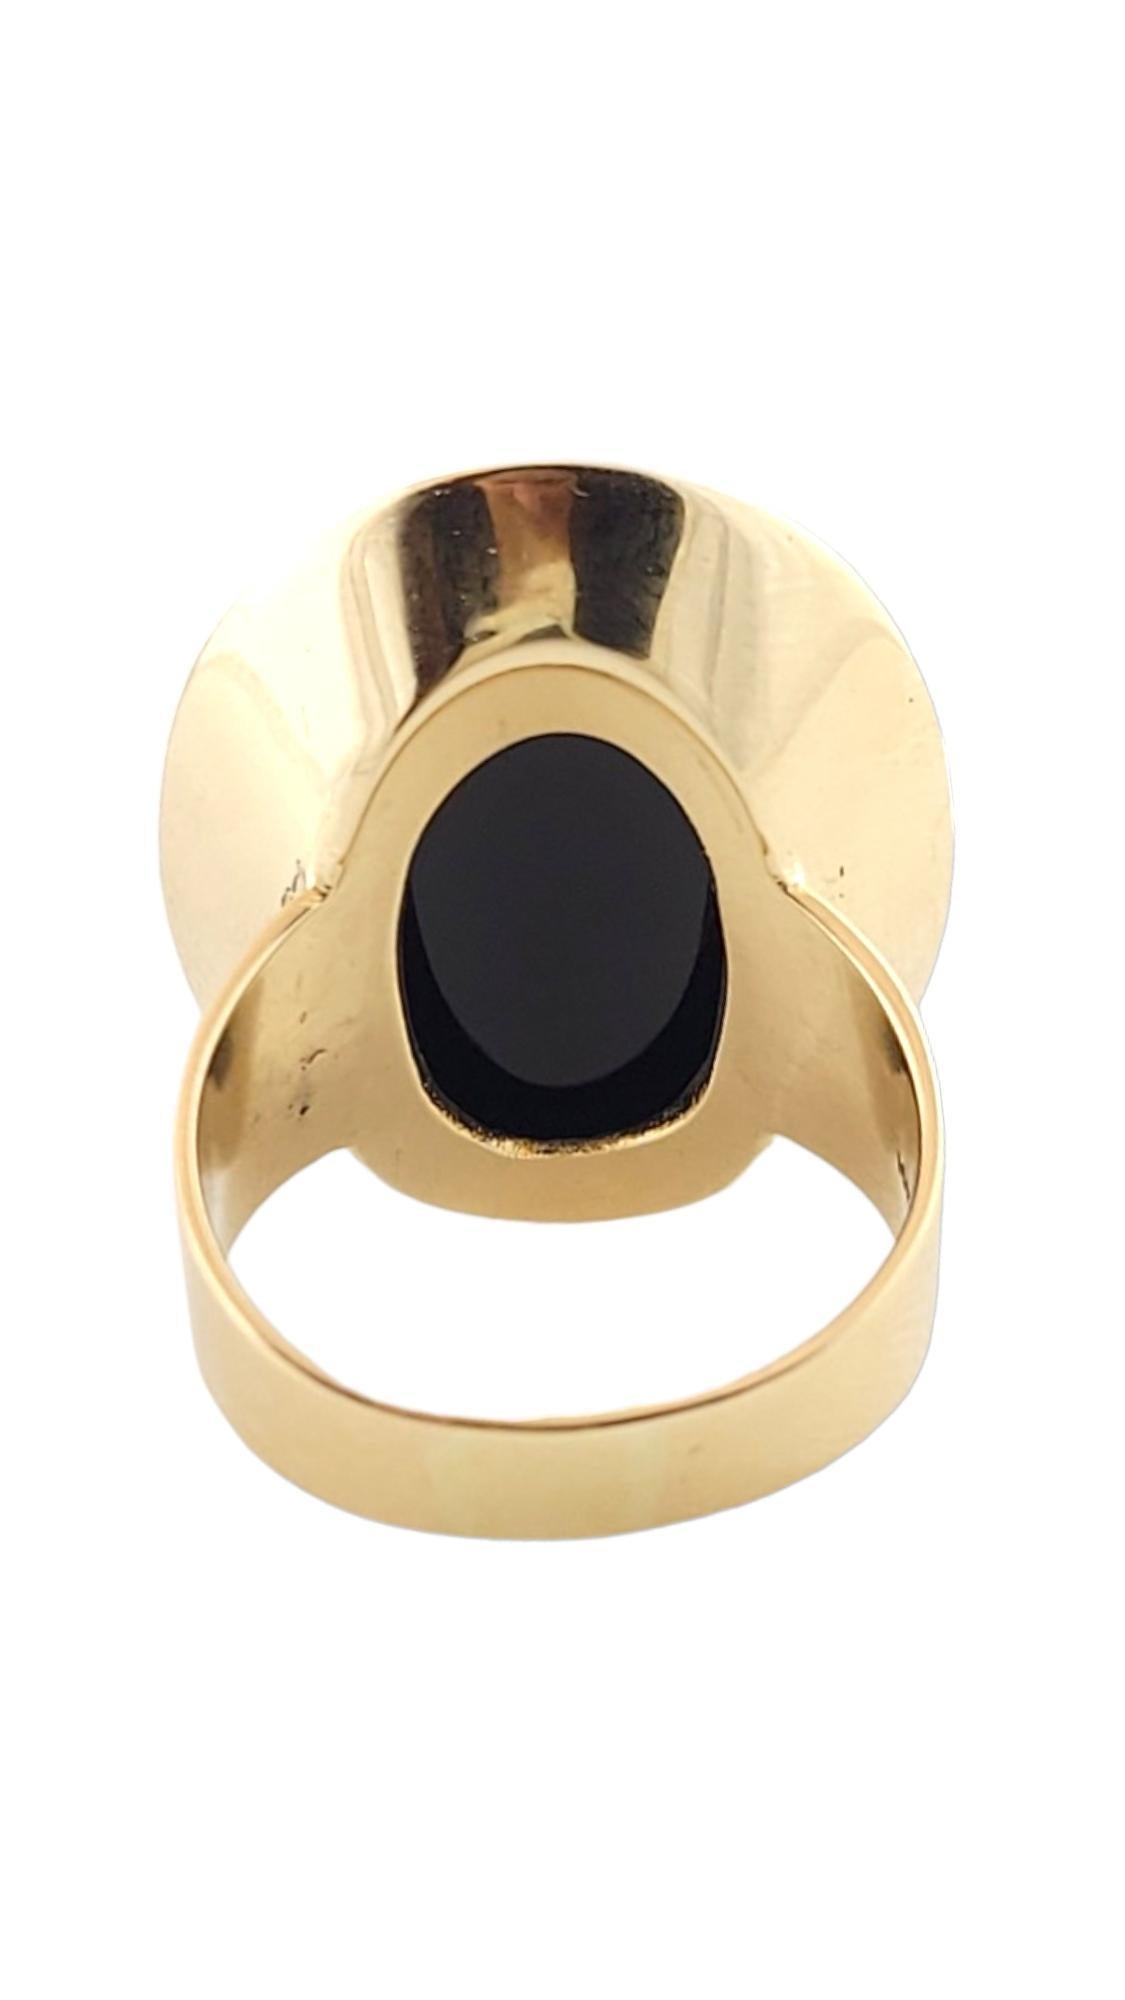 14K Yellow Gold Oval Onyx Ring Size 7.75 #16162 In Good Condition For Sale In Washington Depot, CT